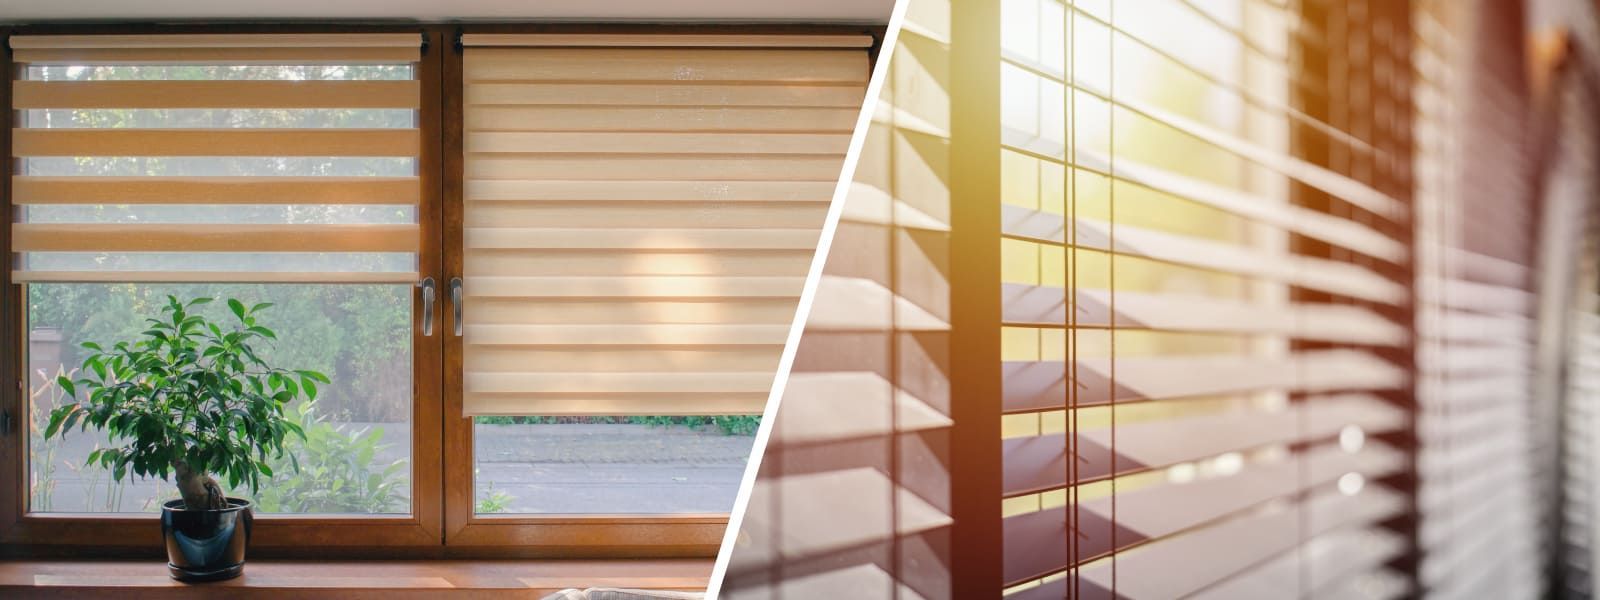 How to choose the right blinds for your home - Sapphire Blinds